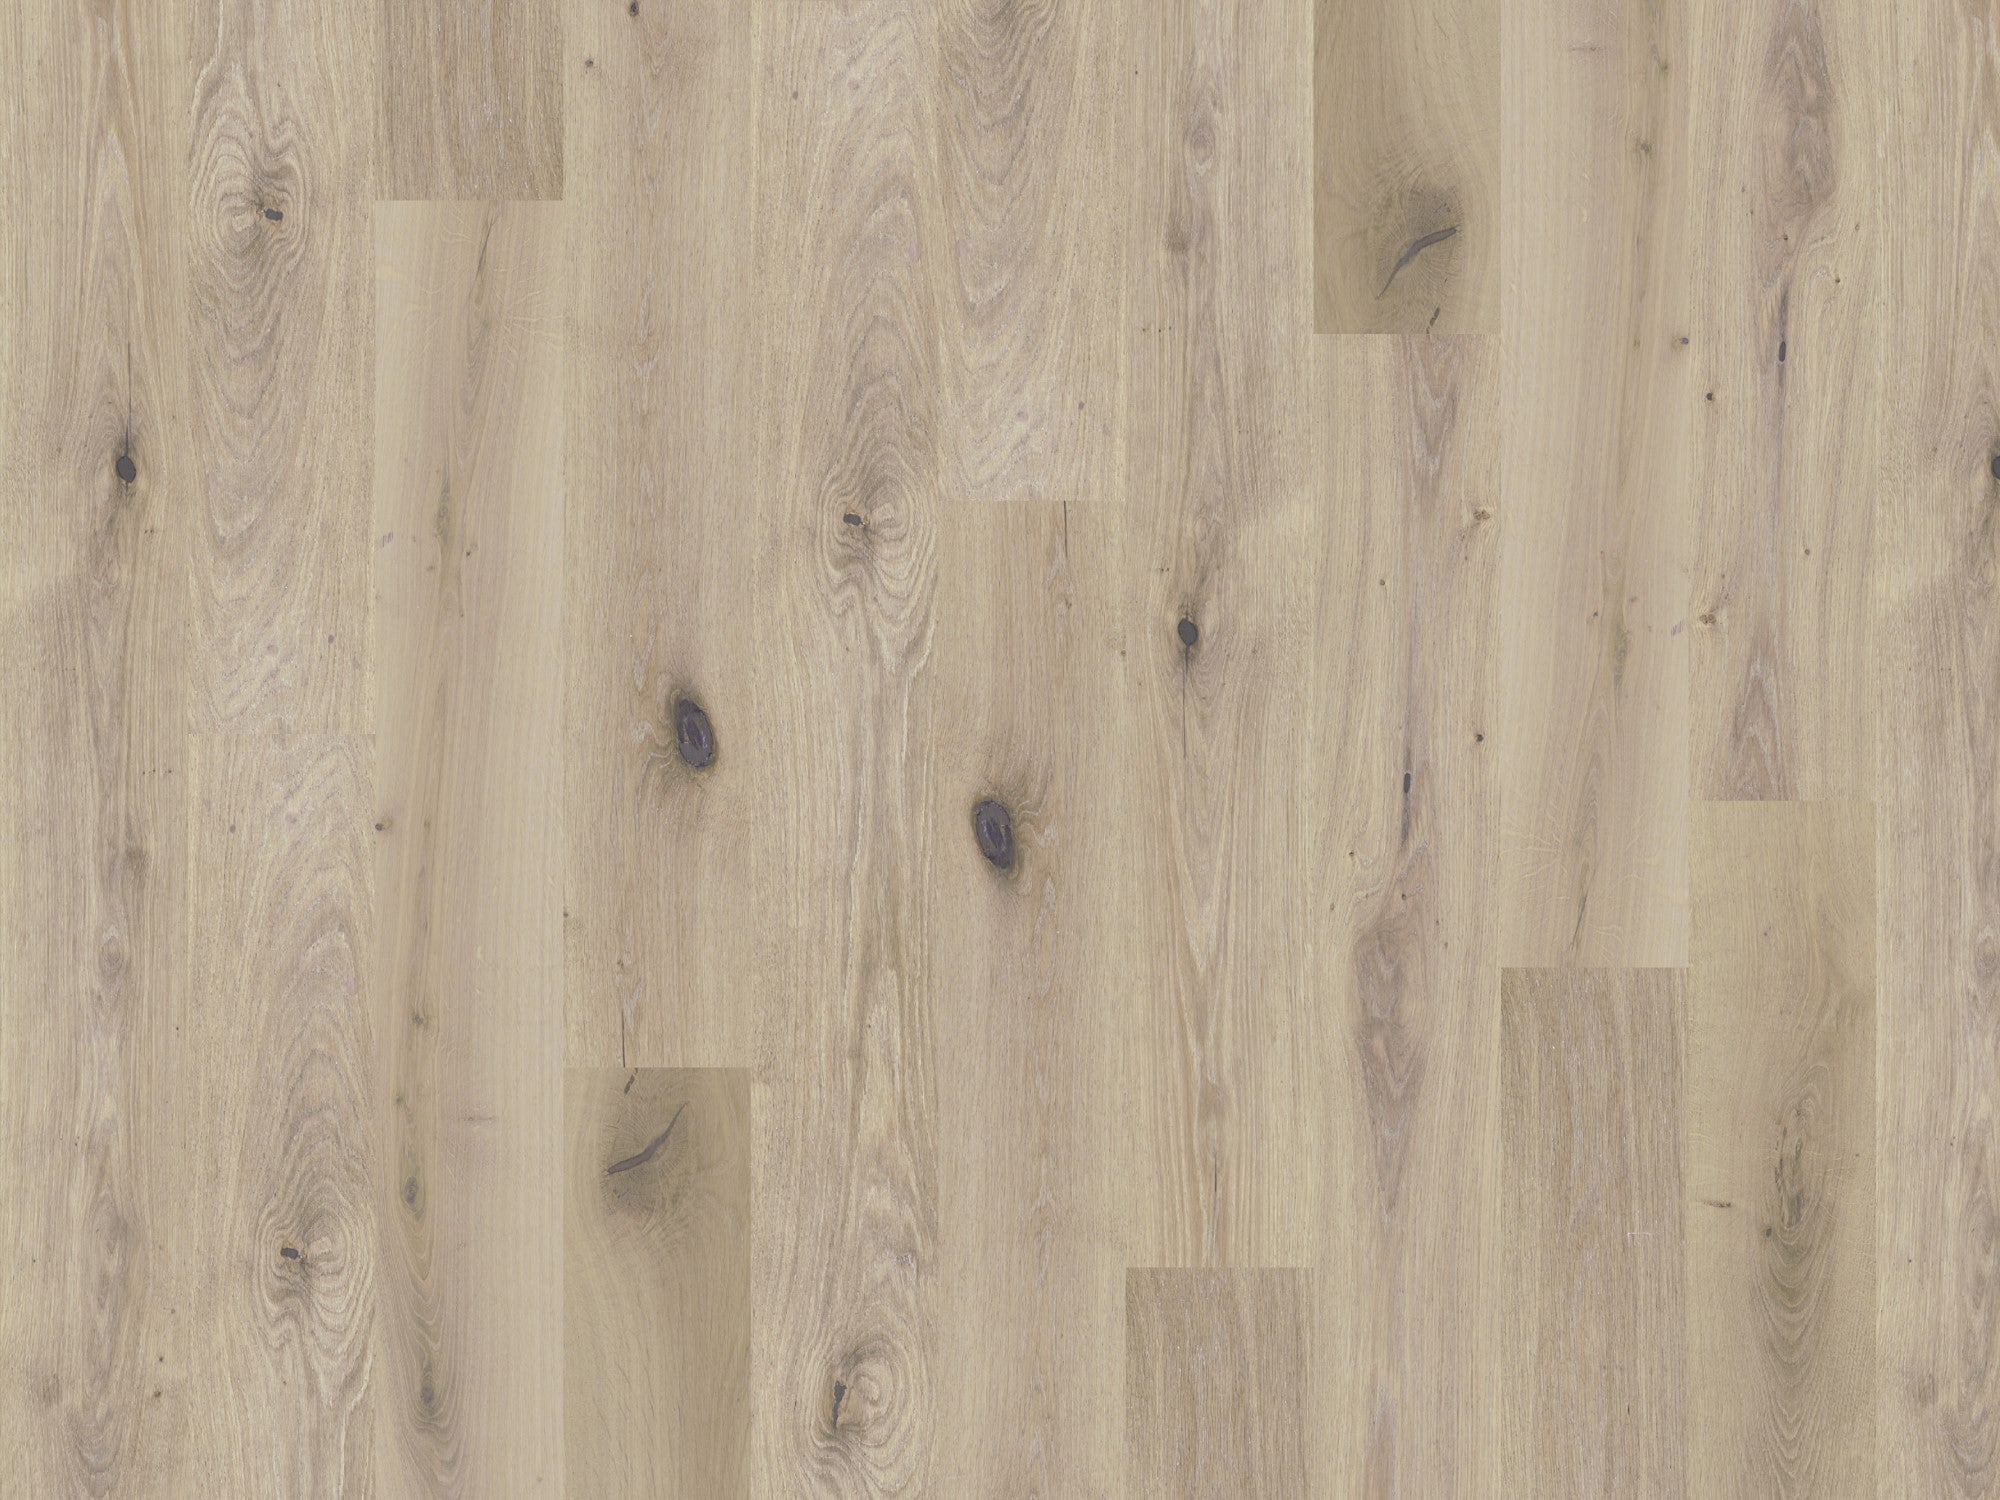 duchateau signature global winds chinook european oak engineered hardnatural wood floor uv lacquer finish for interior use distributed by surface group international